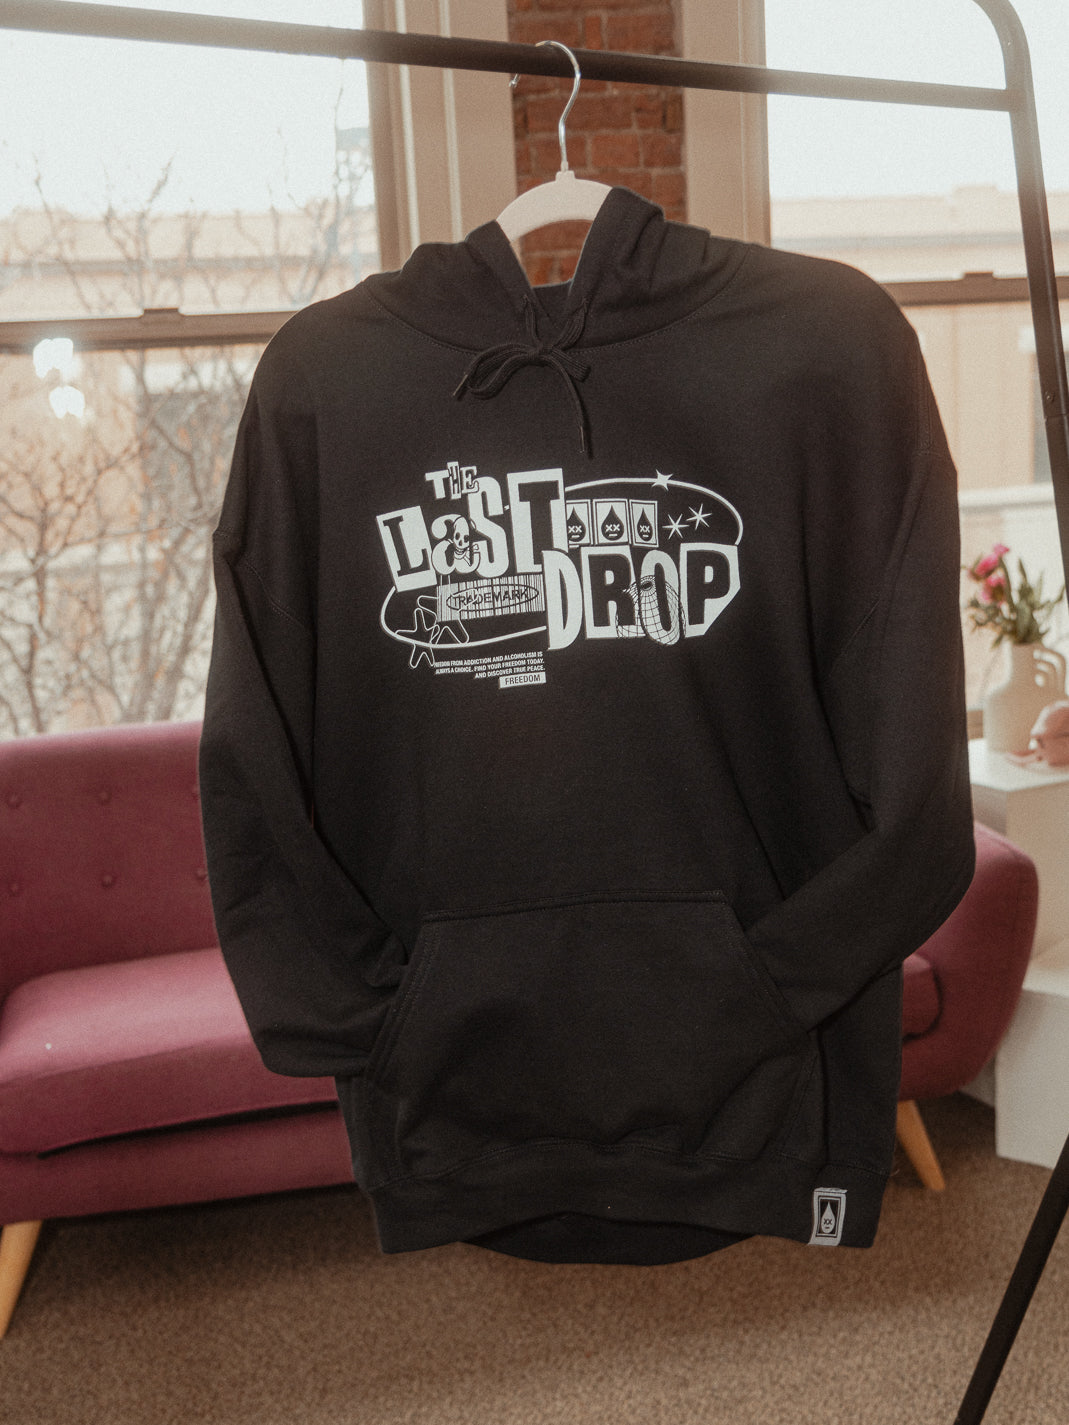 A Trademark Black Y2K Hoodie hangs on a rack in a living room, exuding comfort and style.